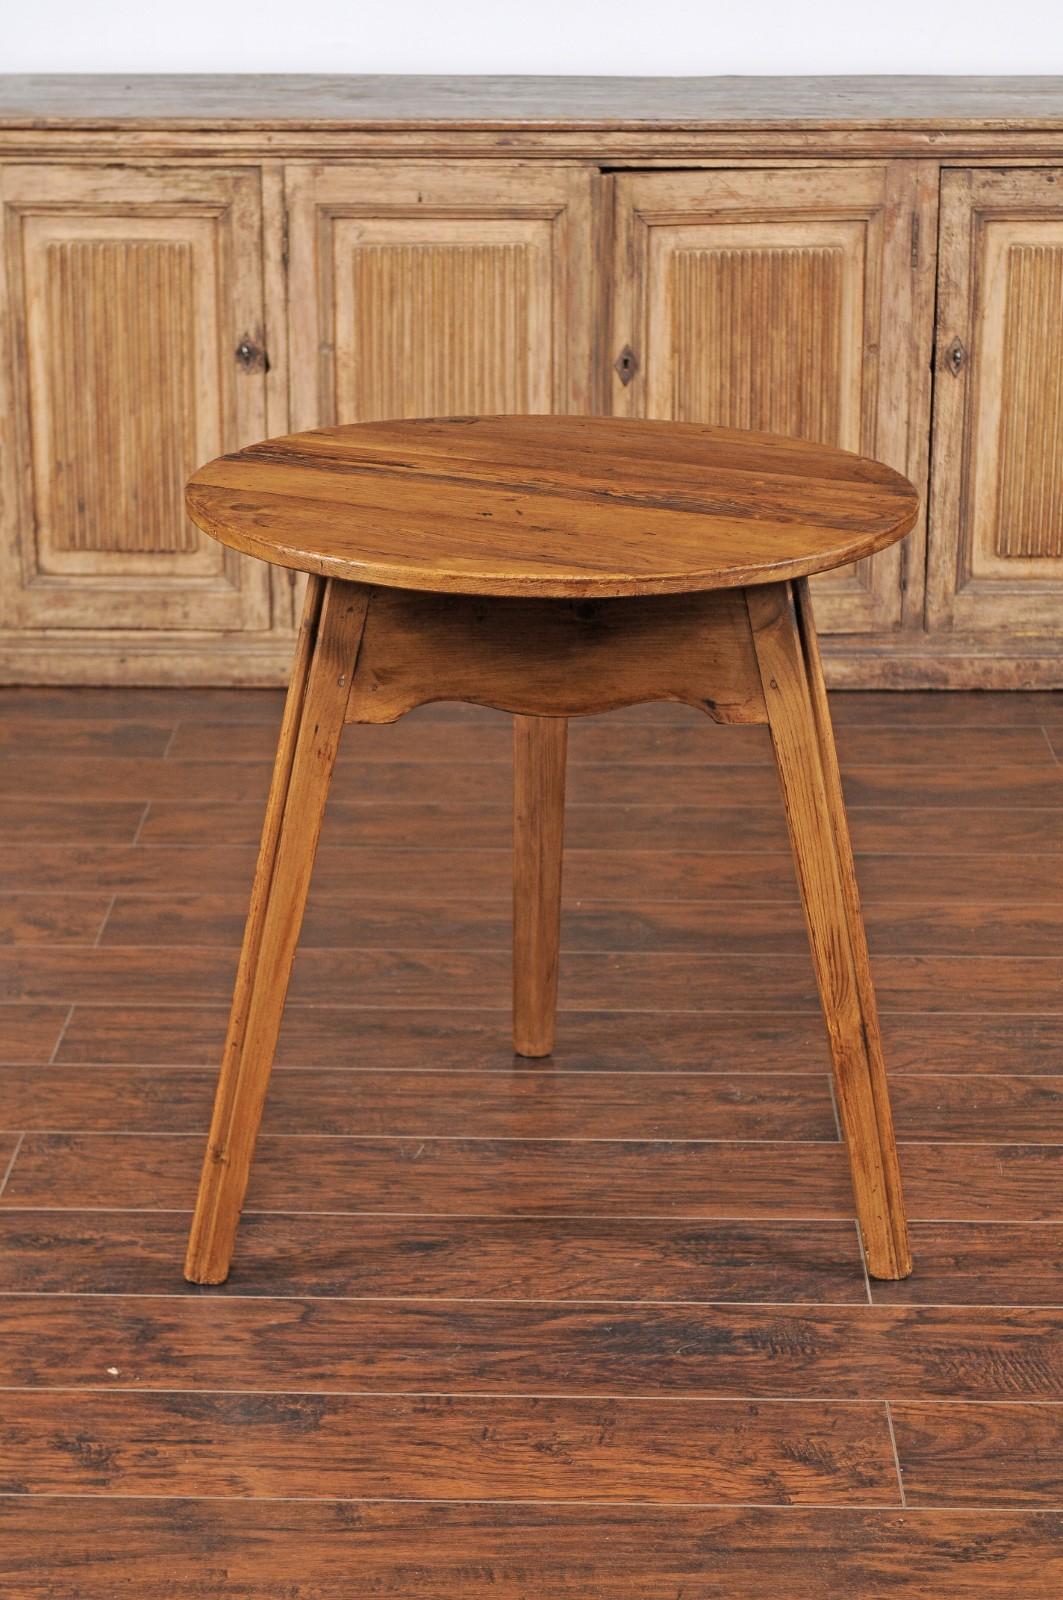 English Turn of the Century Pine Cricket Table with Scalloped Apron, circa 1900 For Sale 2